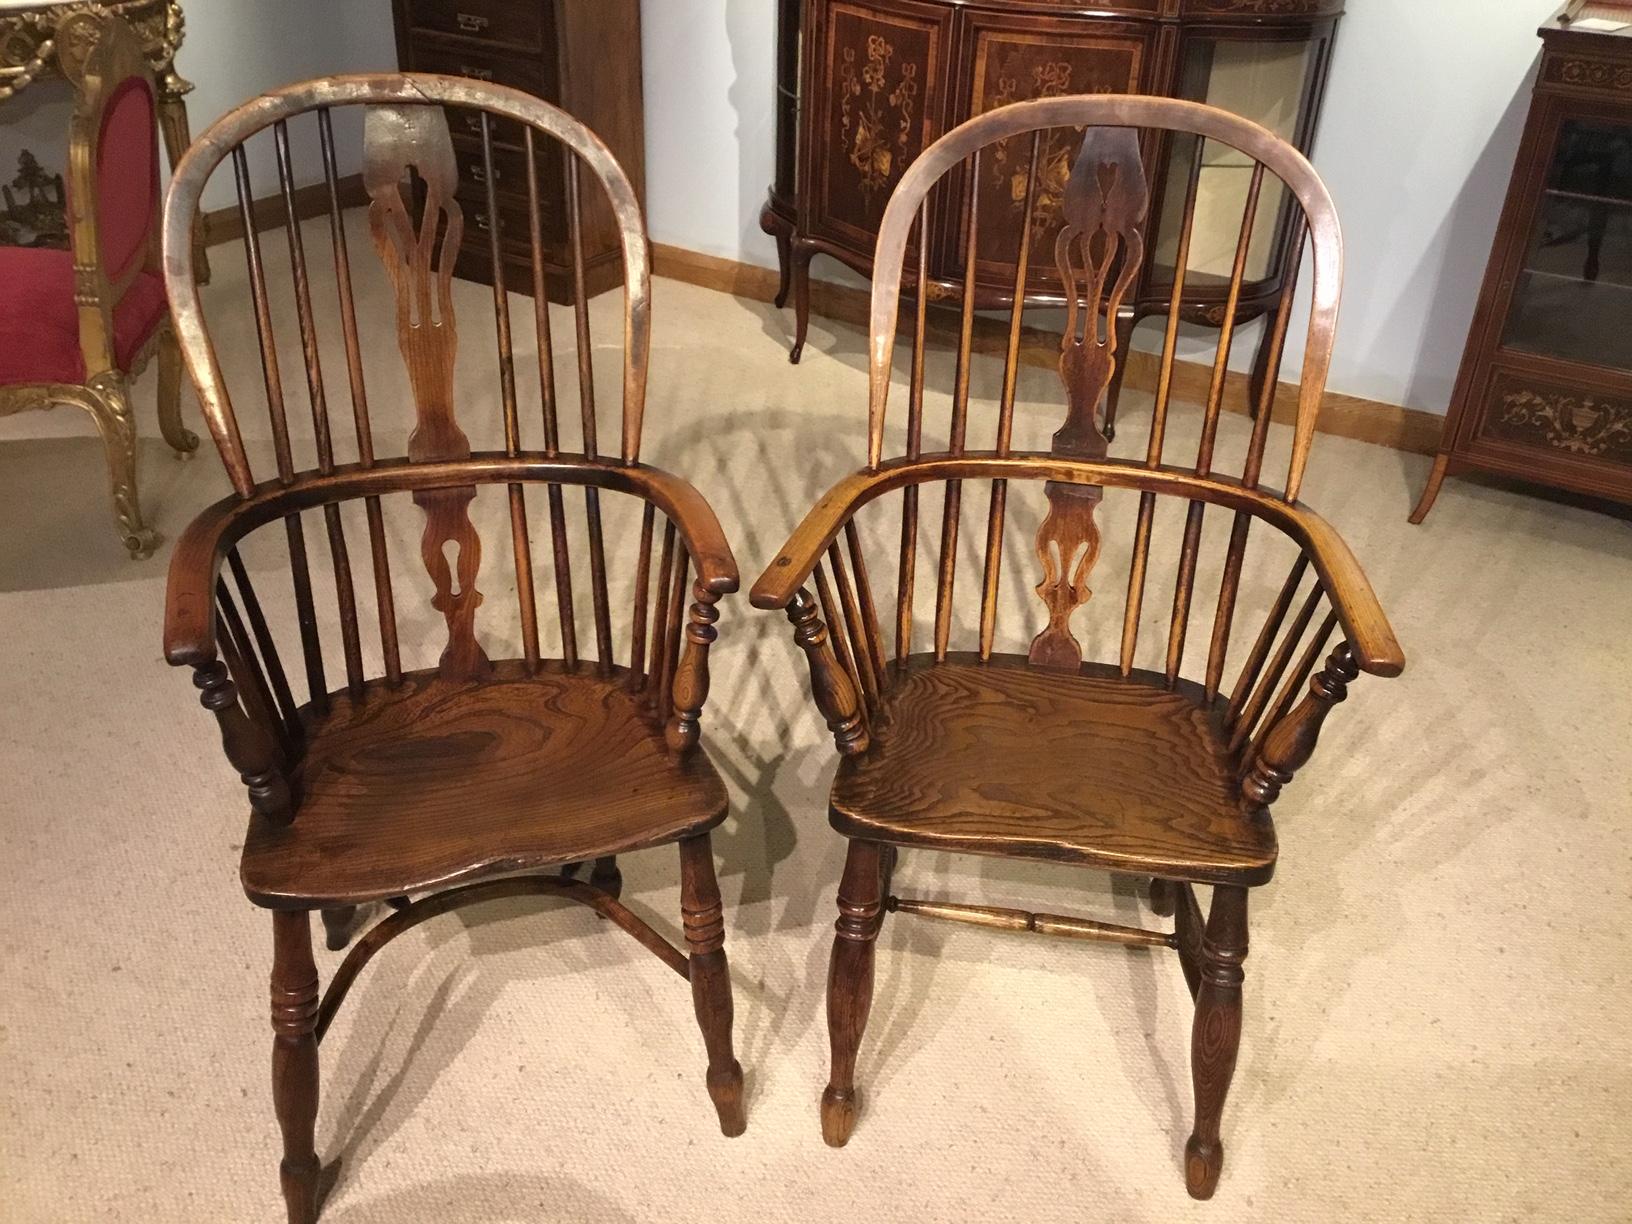 A lovely harlequin set of six 19th century ash and elm antique Windsor armchairs. Comprising of four matching low back Windsor armchairs and two similar high back armchairs, each chair constructed using ash and elm with dished saddle seats in ash